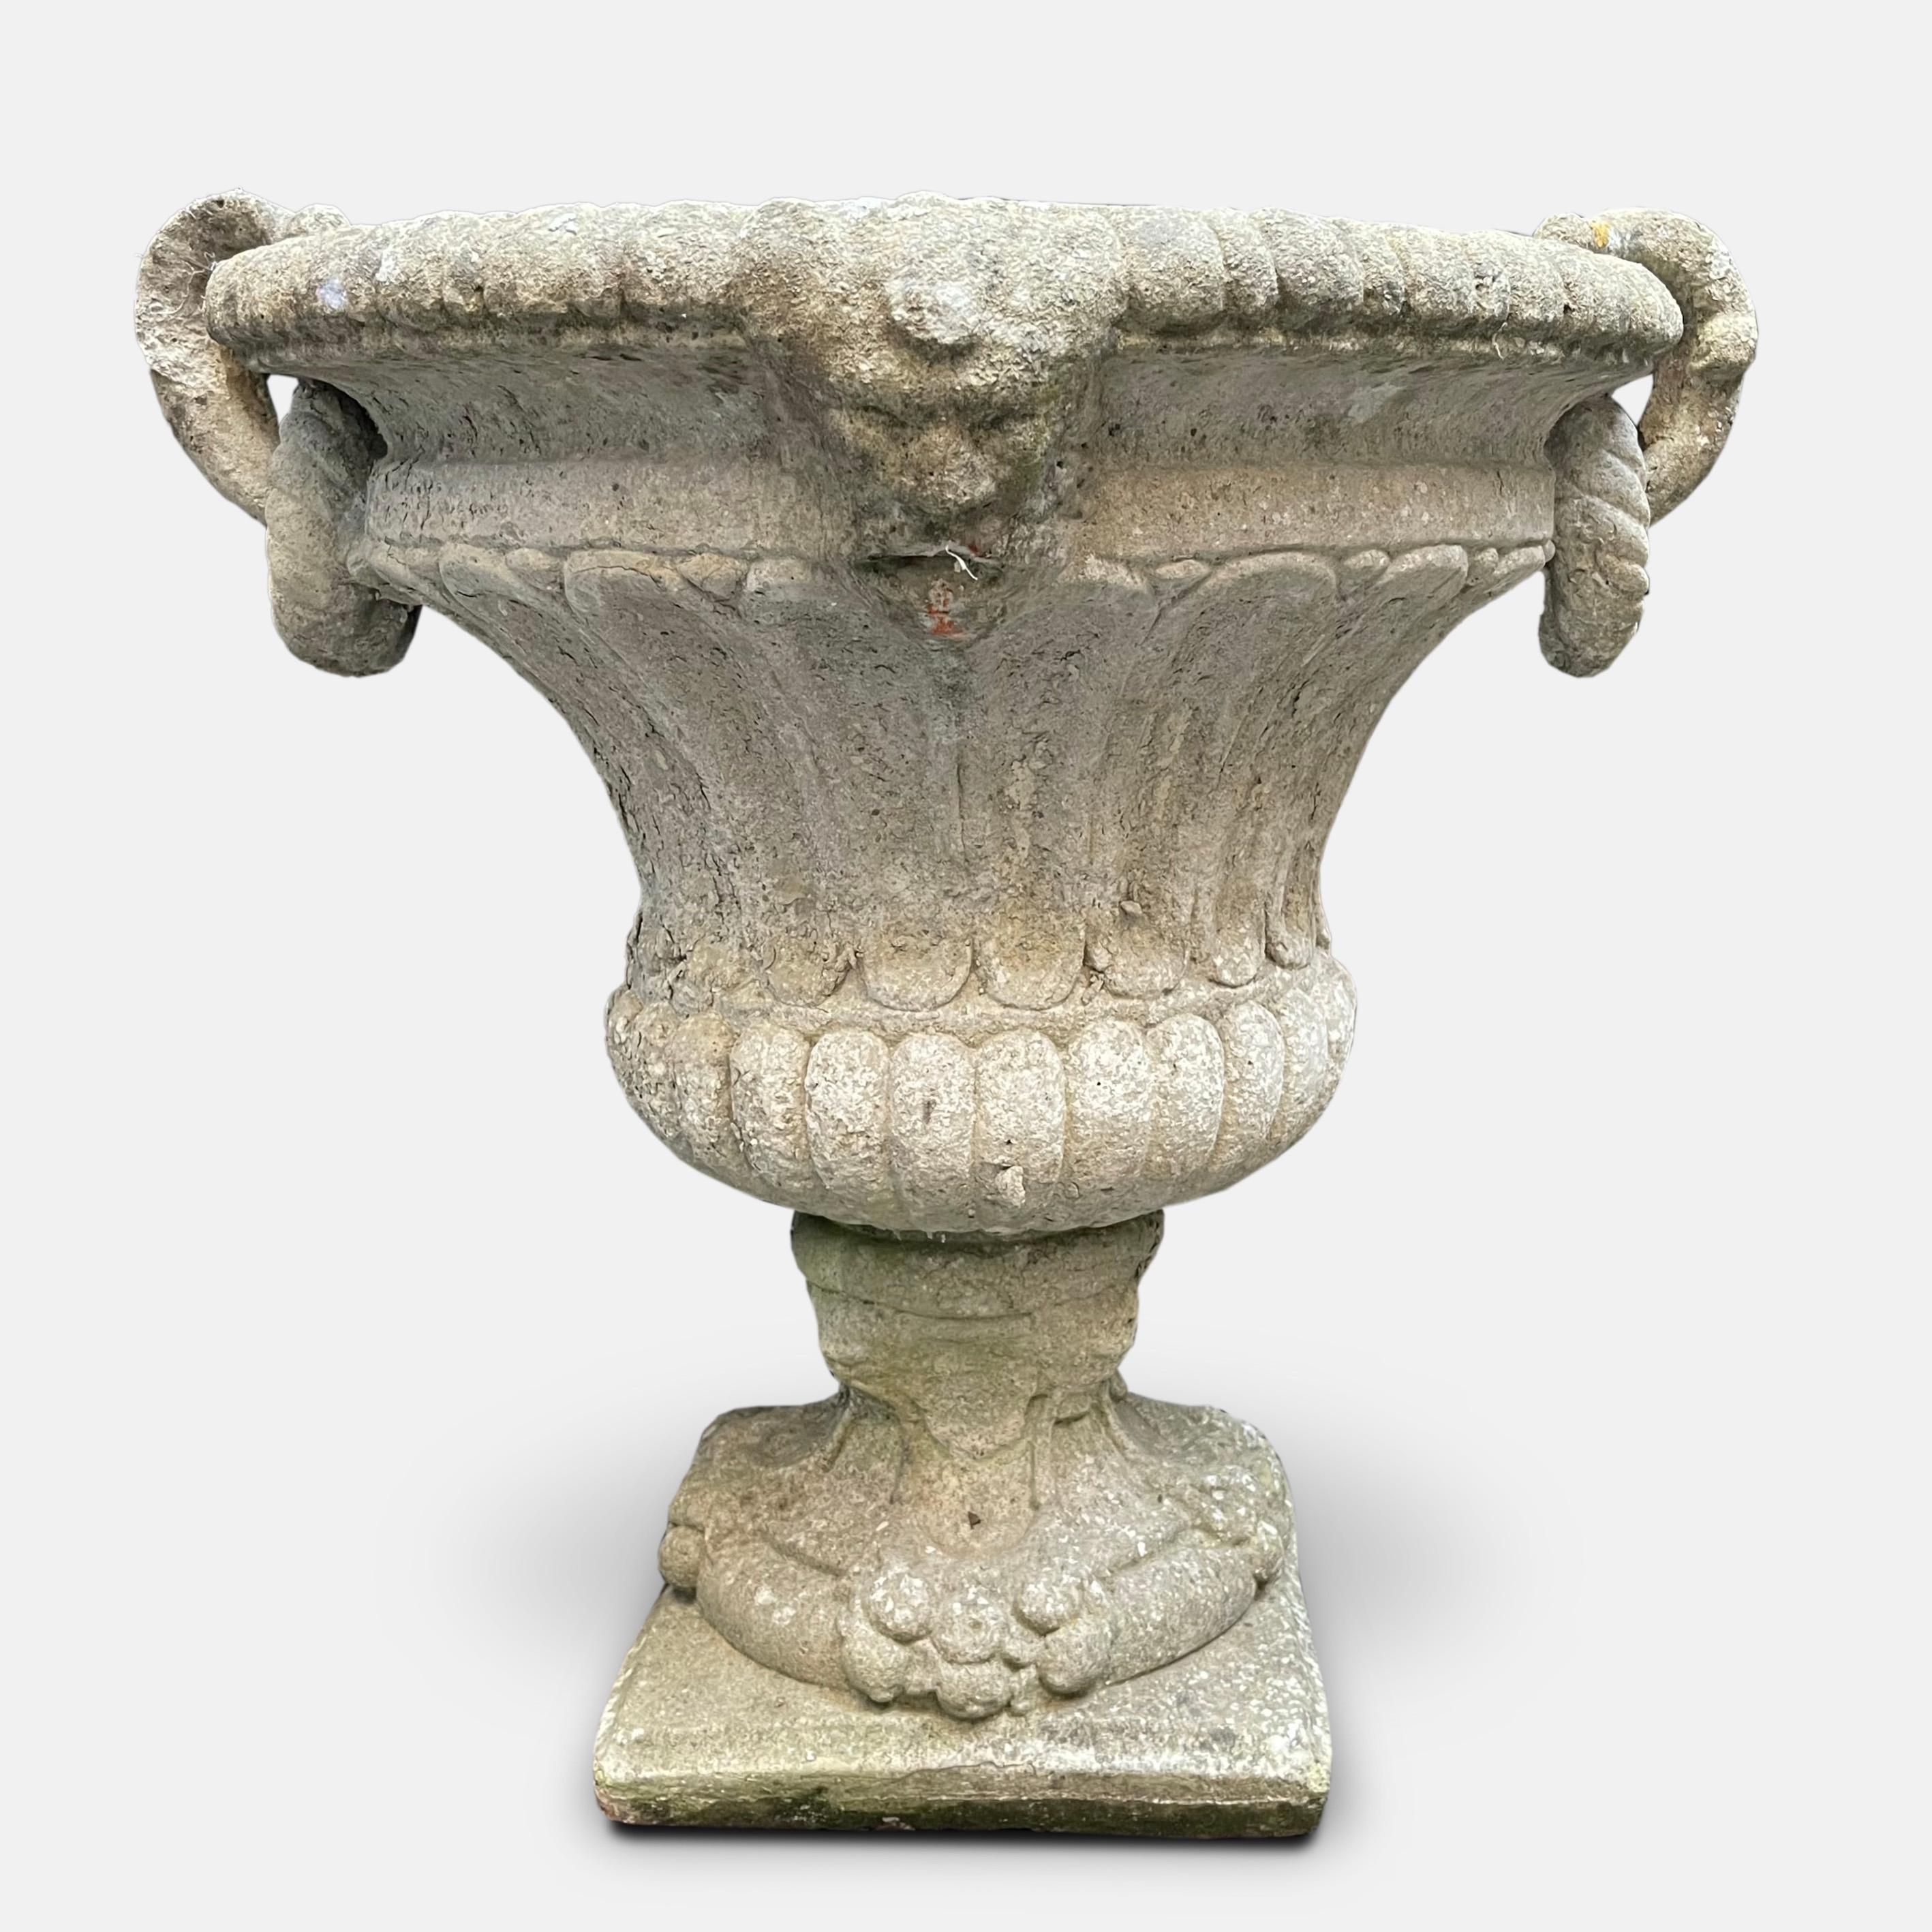 A pair of ornate early 20th century urn planters, each on a pedestal base, with twin handles and a thick ring shaped like a loop of rope through each handle, and formed, like the body of the urns from moulded reconstituted stone.
 Dimensions: H 68cm